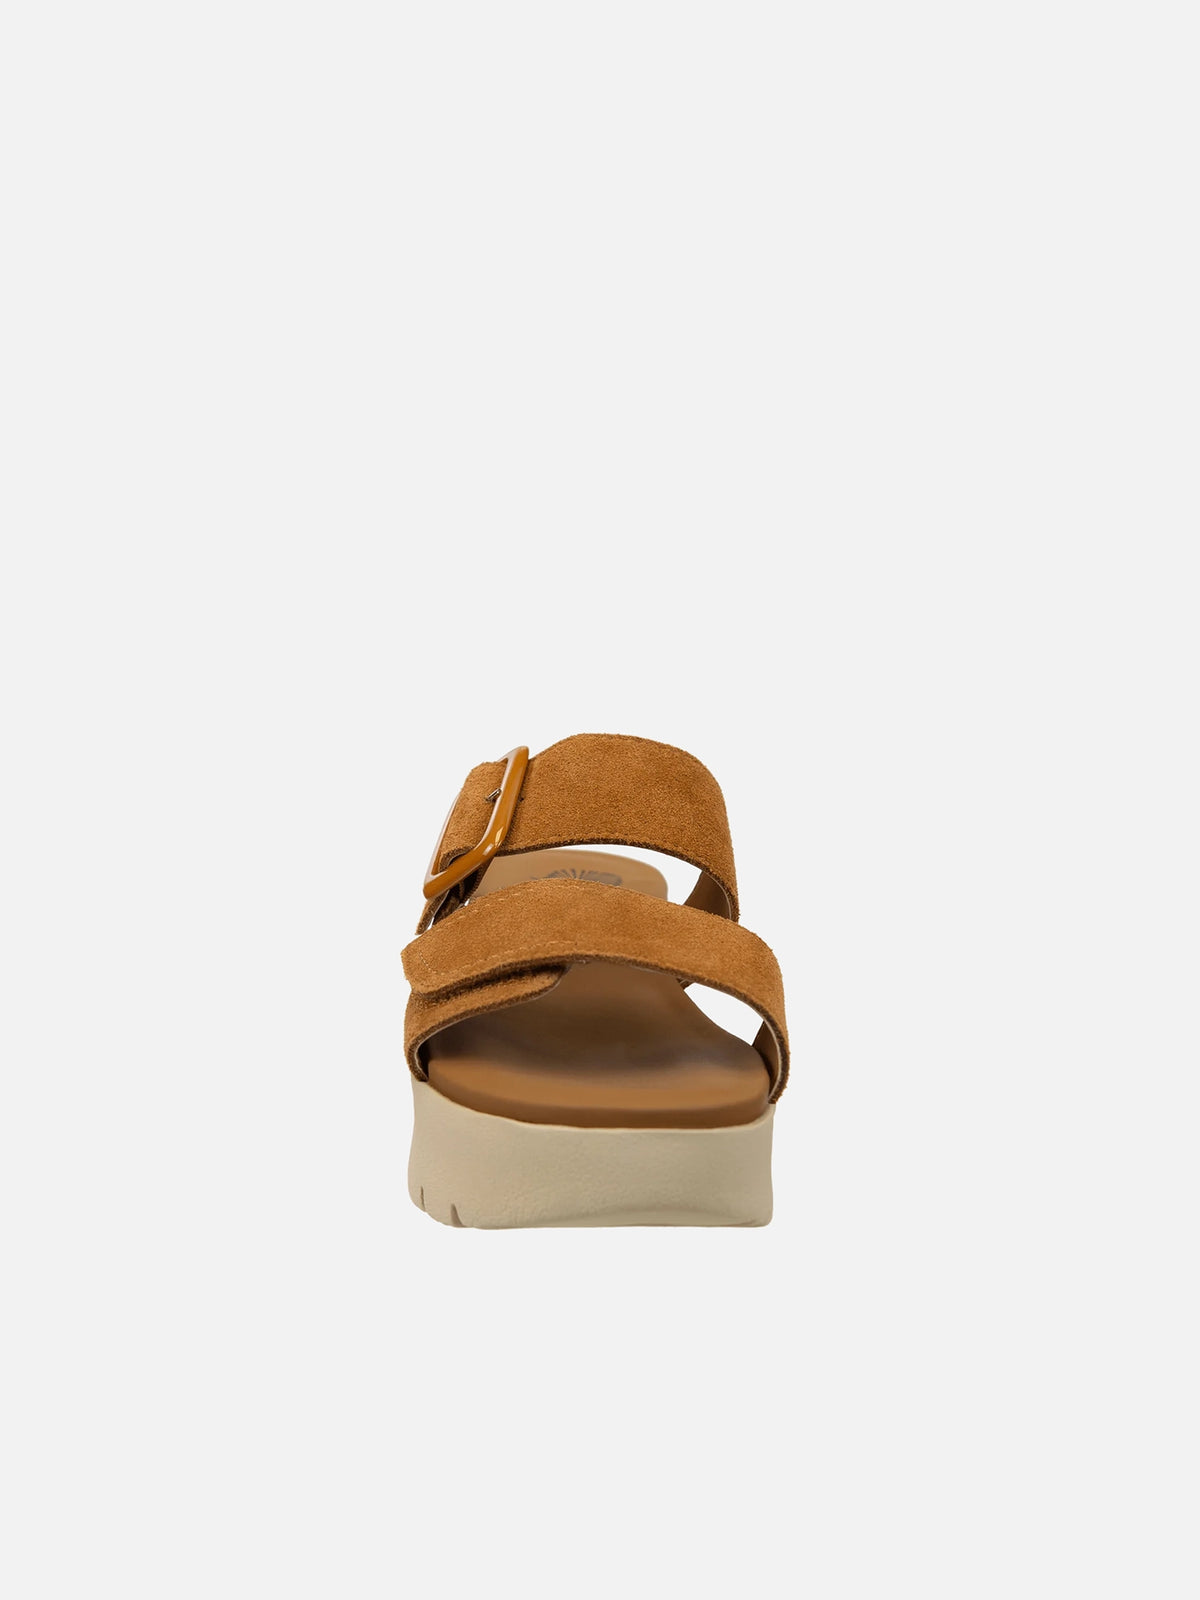 OTBT cameo double strap platform sandals in brown